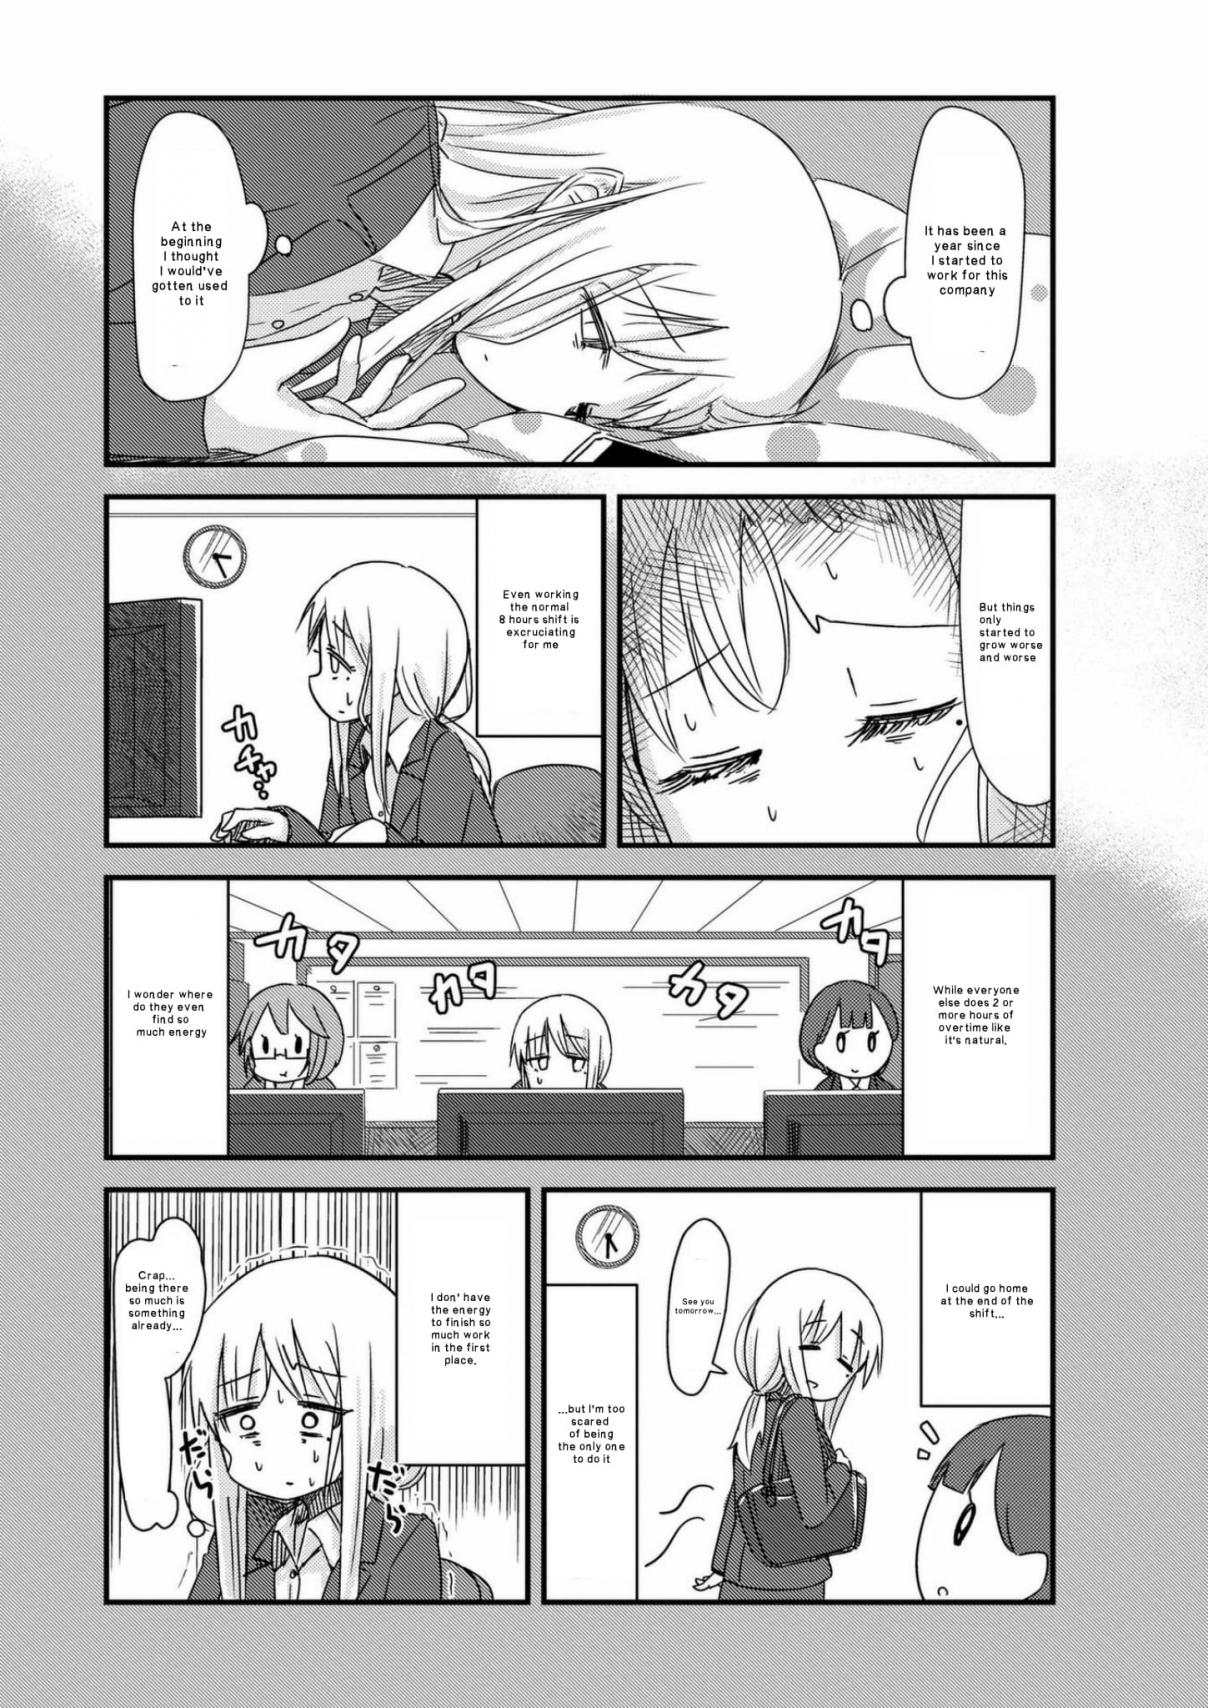 She doesn't know why she lives. Vol. 2 Ch. 14 Worst Office Lady